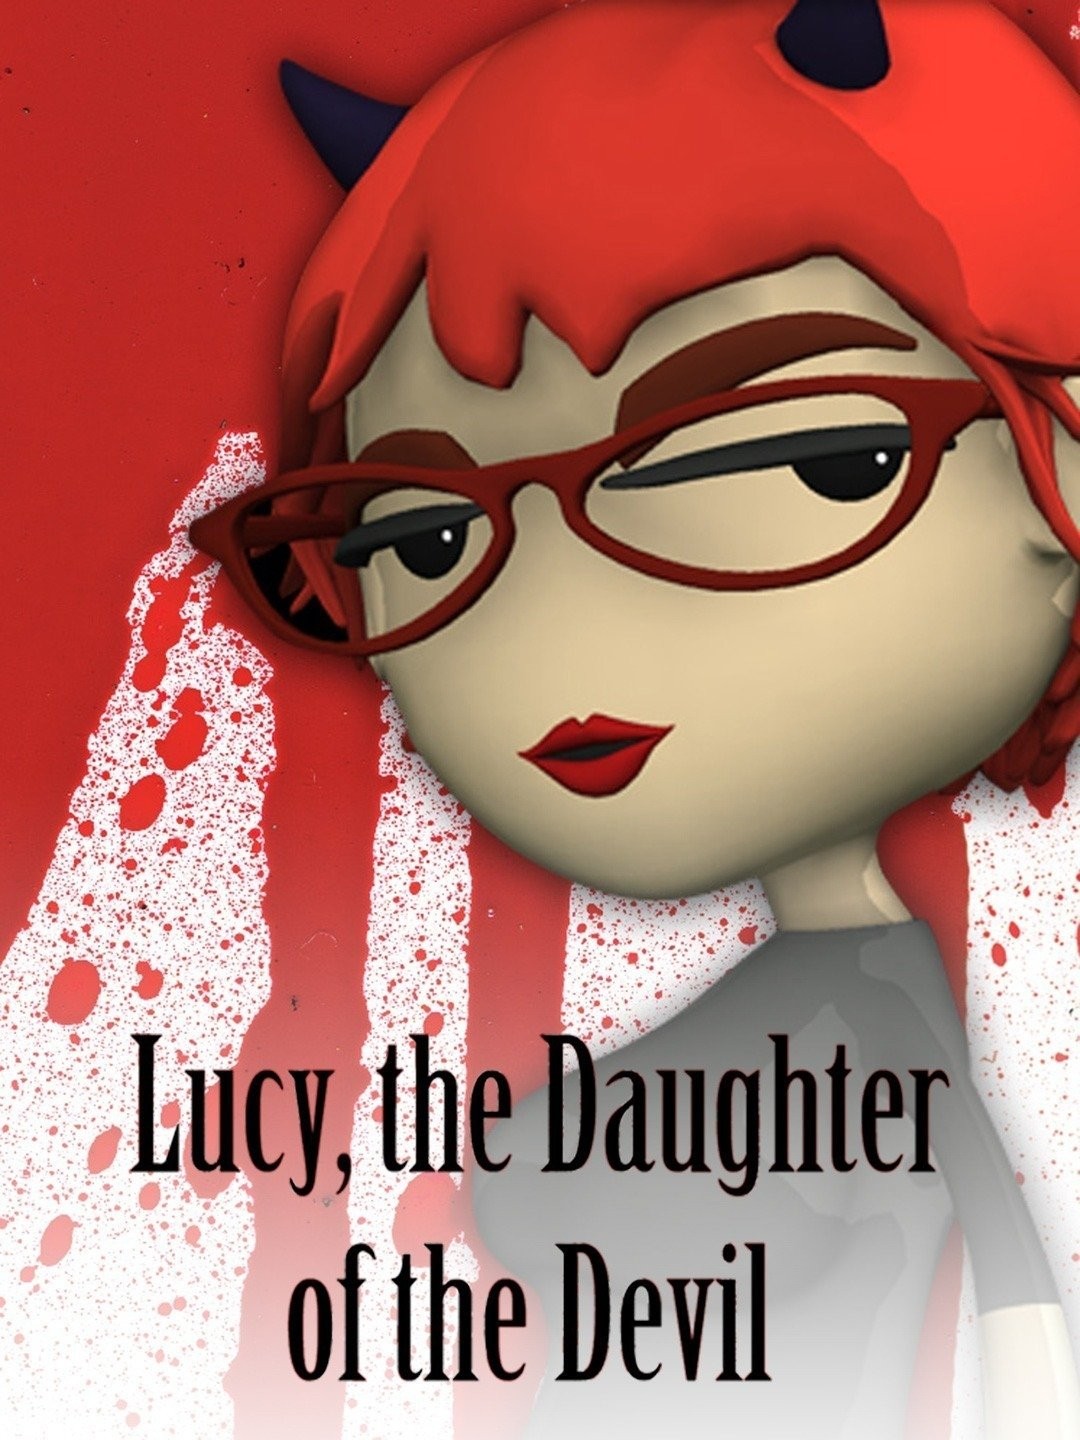 angela ferguson add photo lucy the daughter of the devil